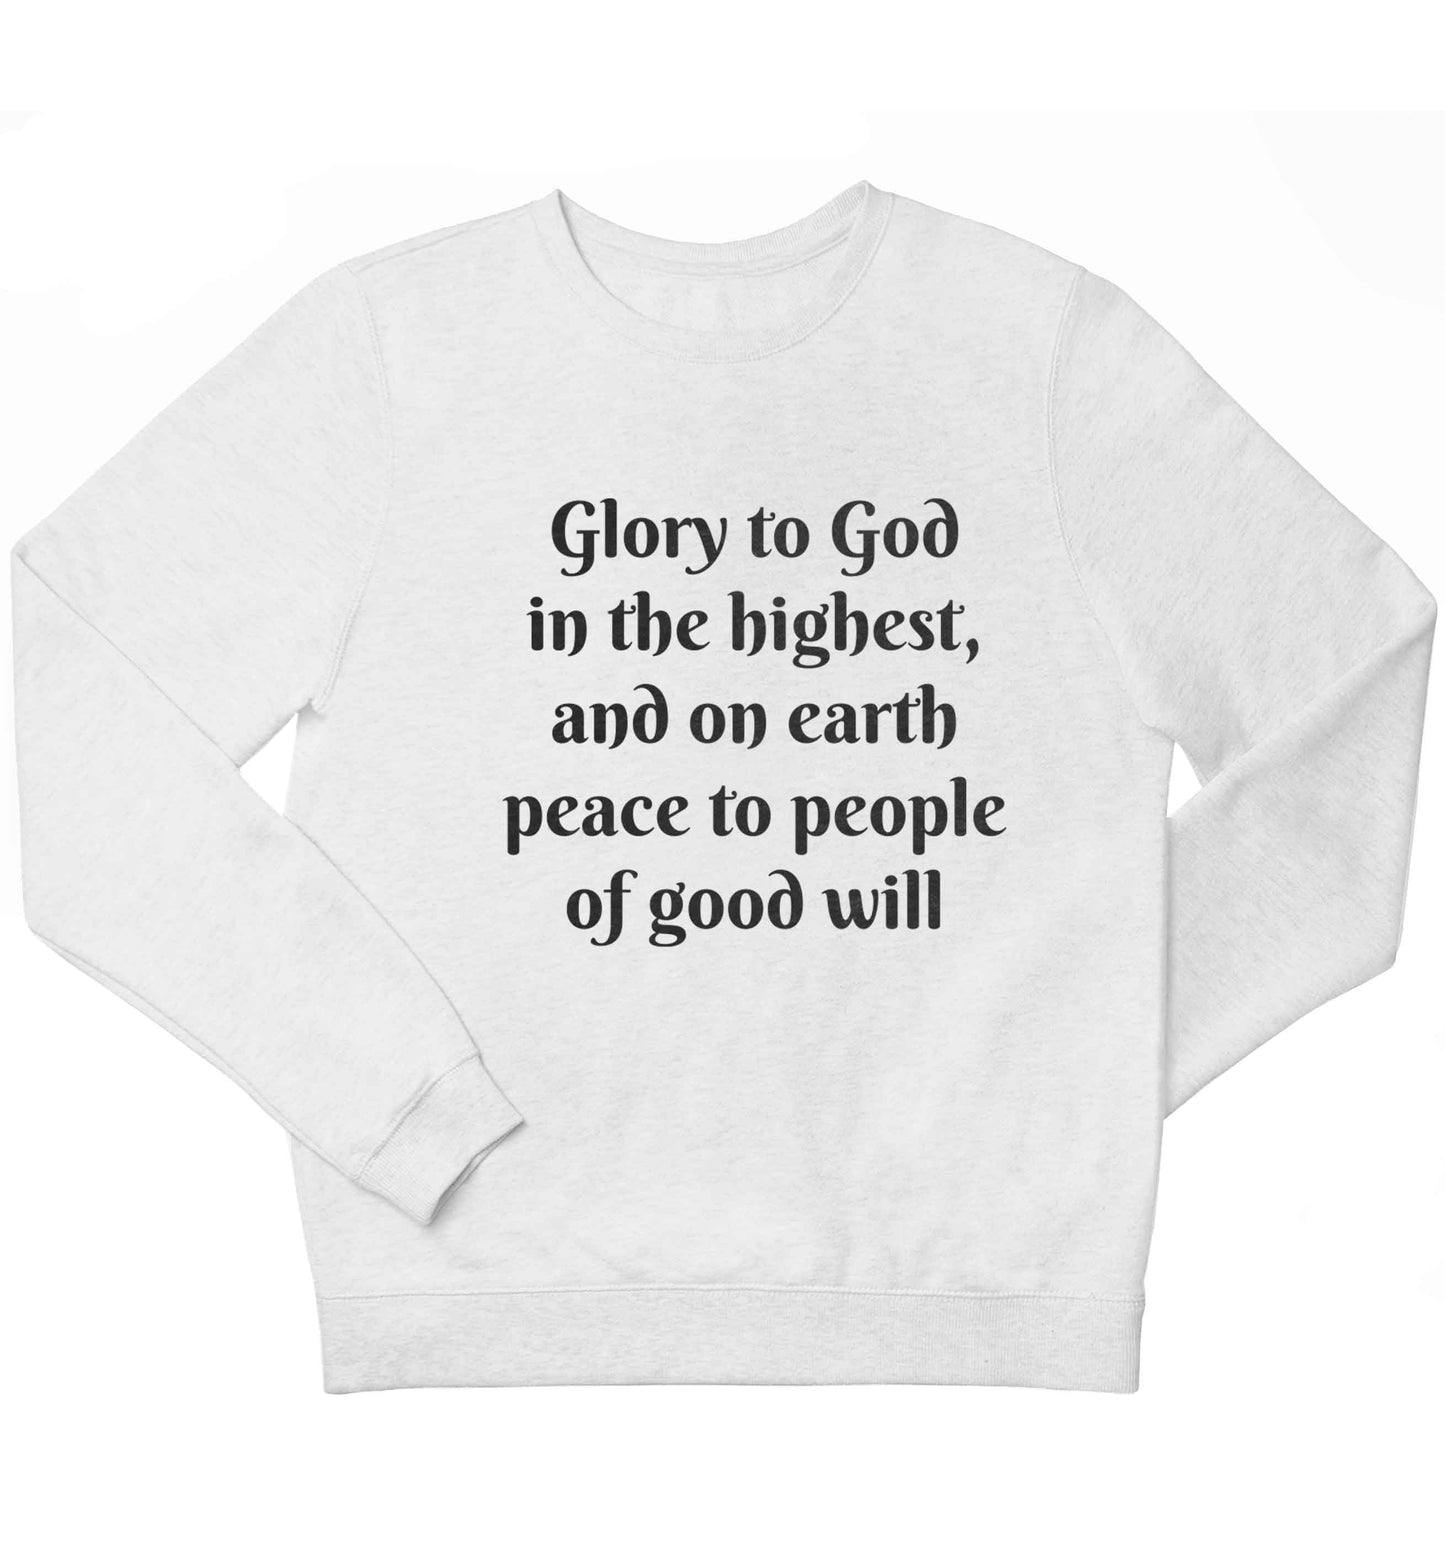 Glory to God in the highest, and on earth peace to people of good will children's white sweater 12-13 Years